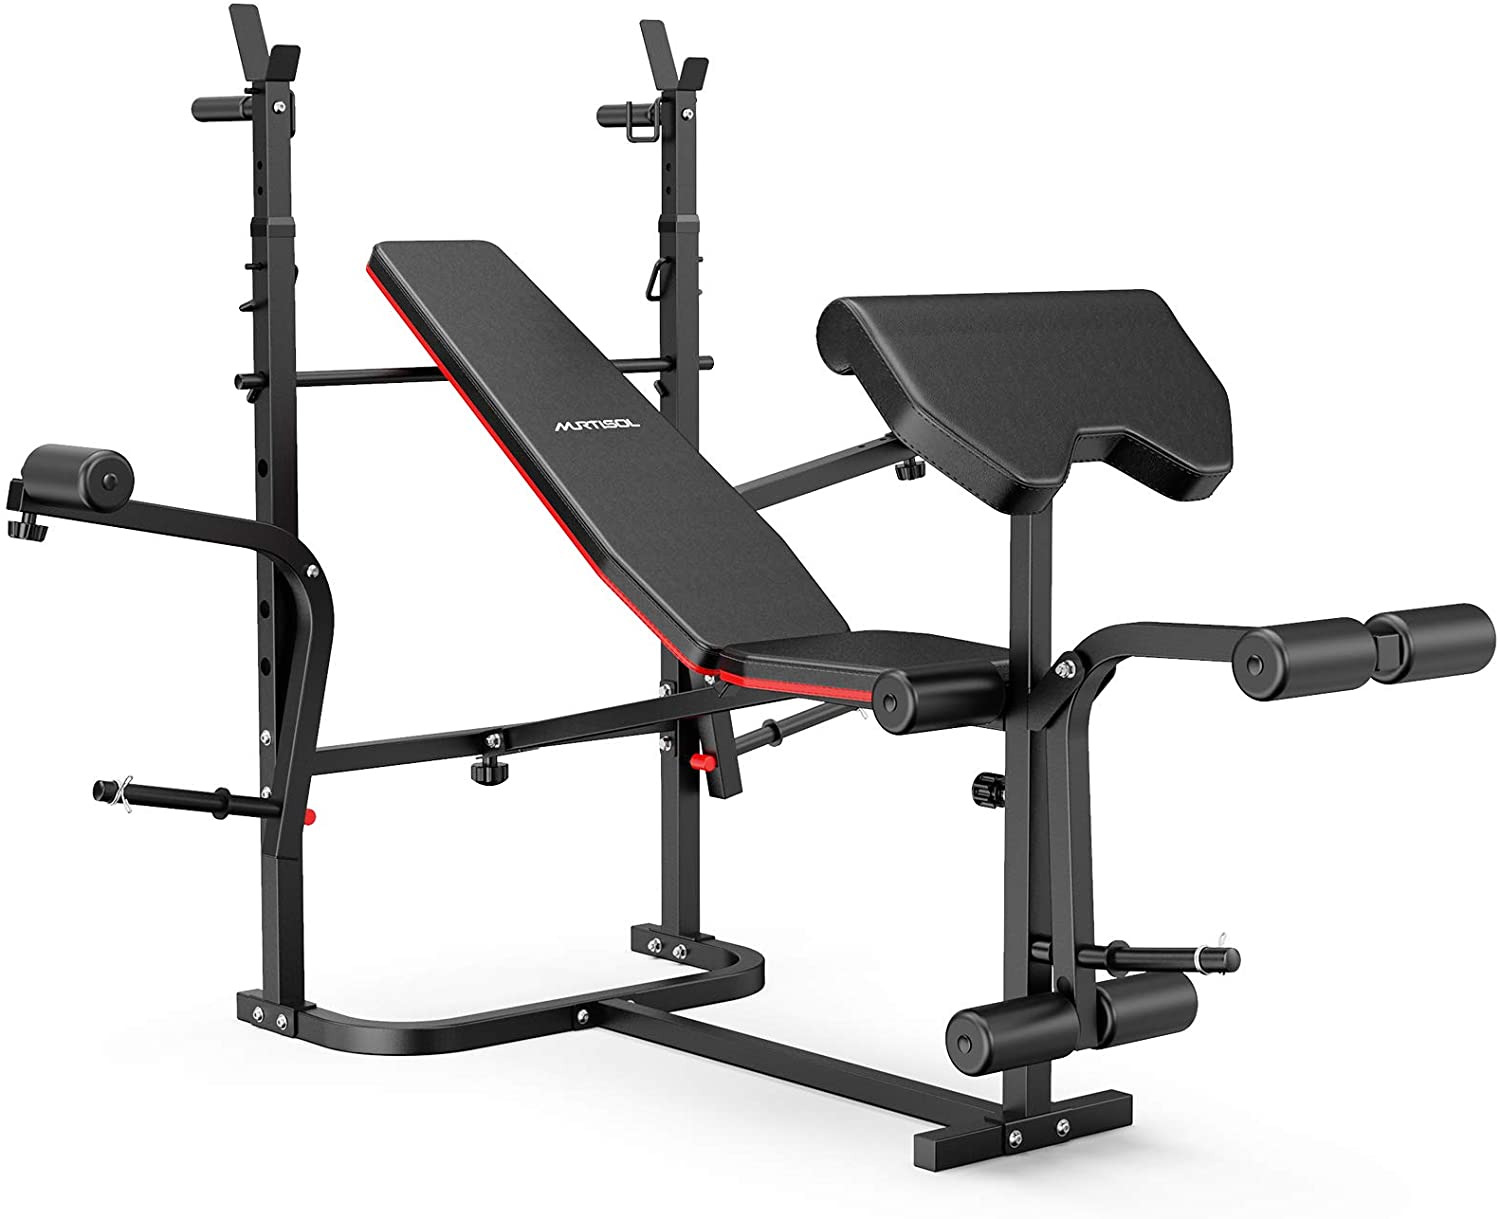 Murtisol Olympic Weight Bench 5-Level Adjustable Weight-Lifting Full-Body Workout with 243lbs Weight Capacity